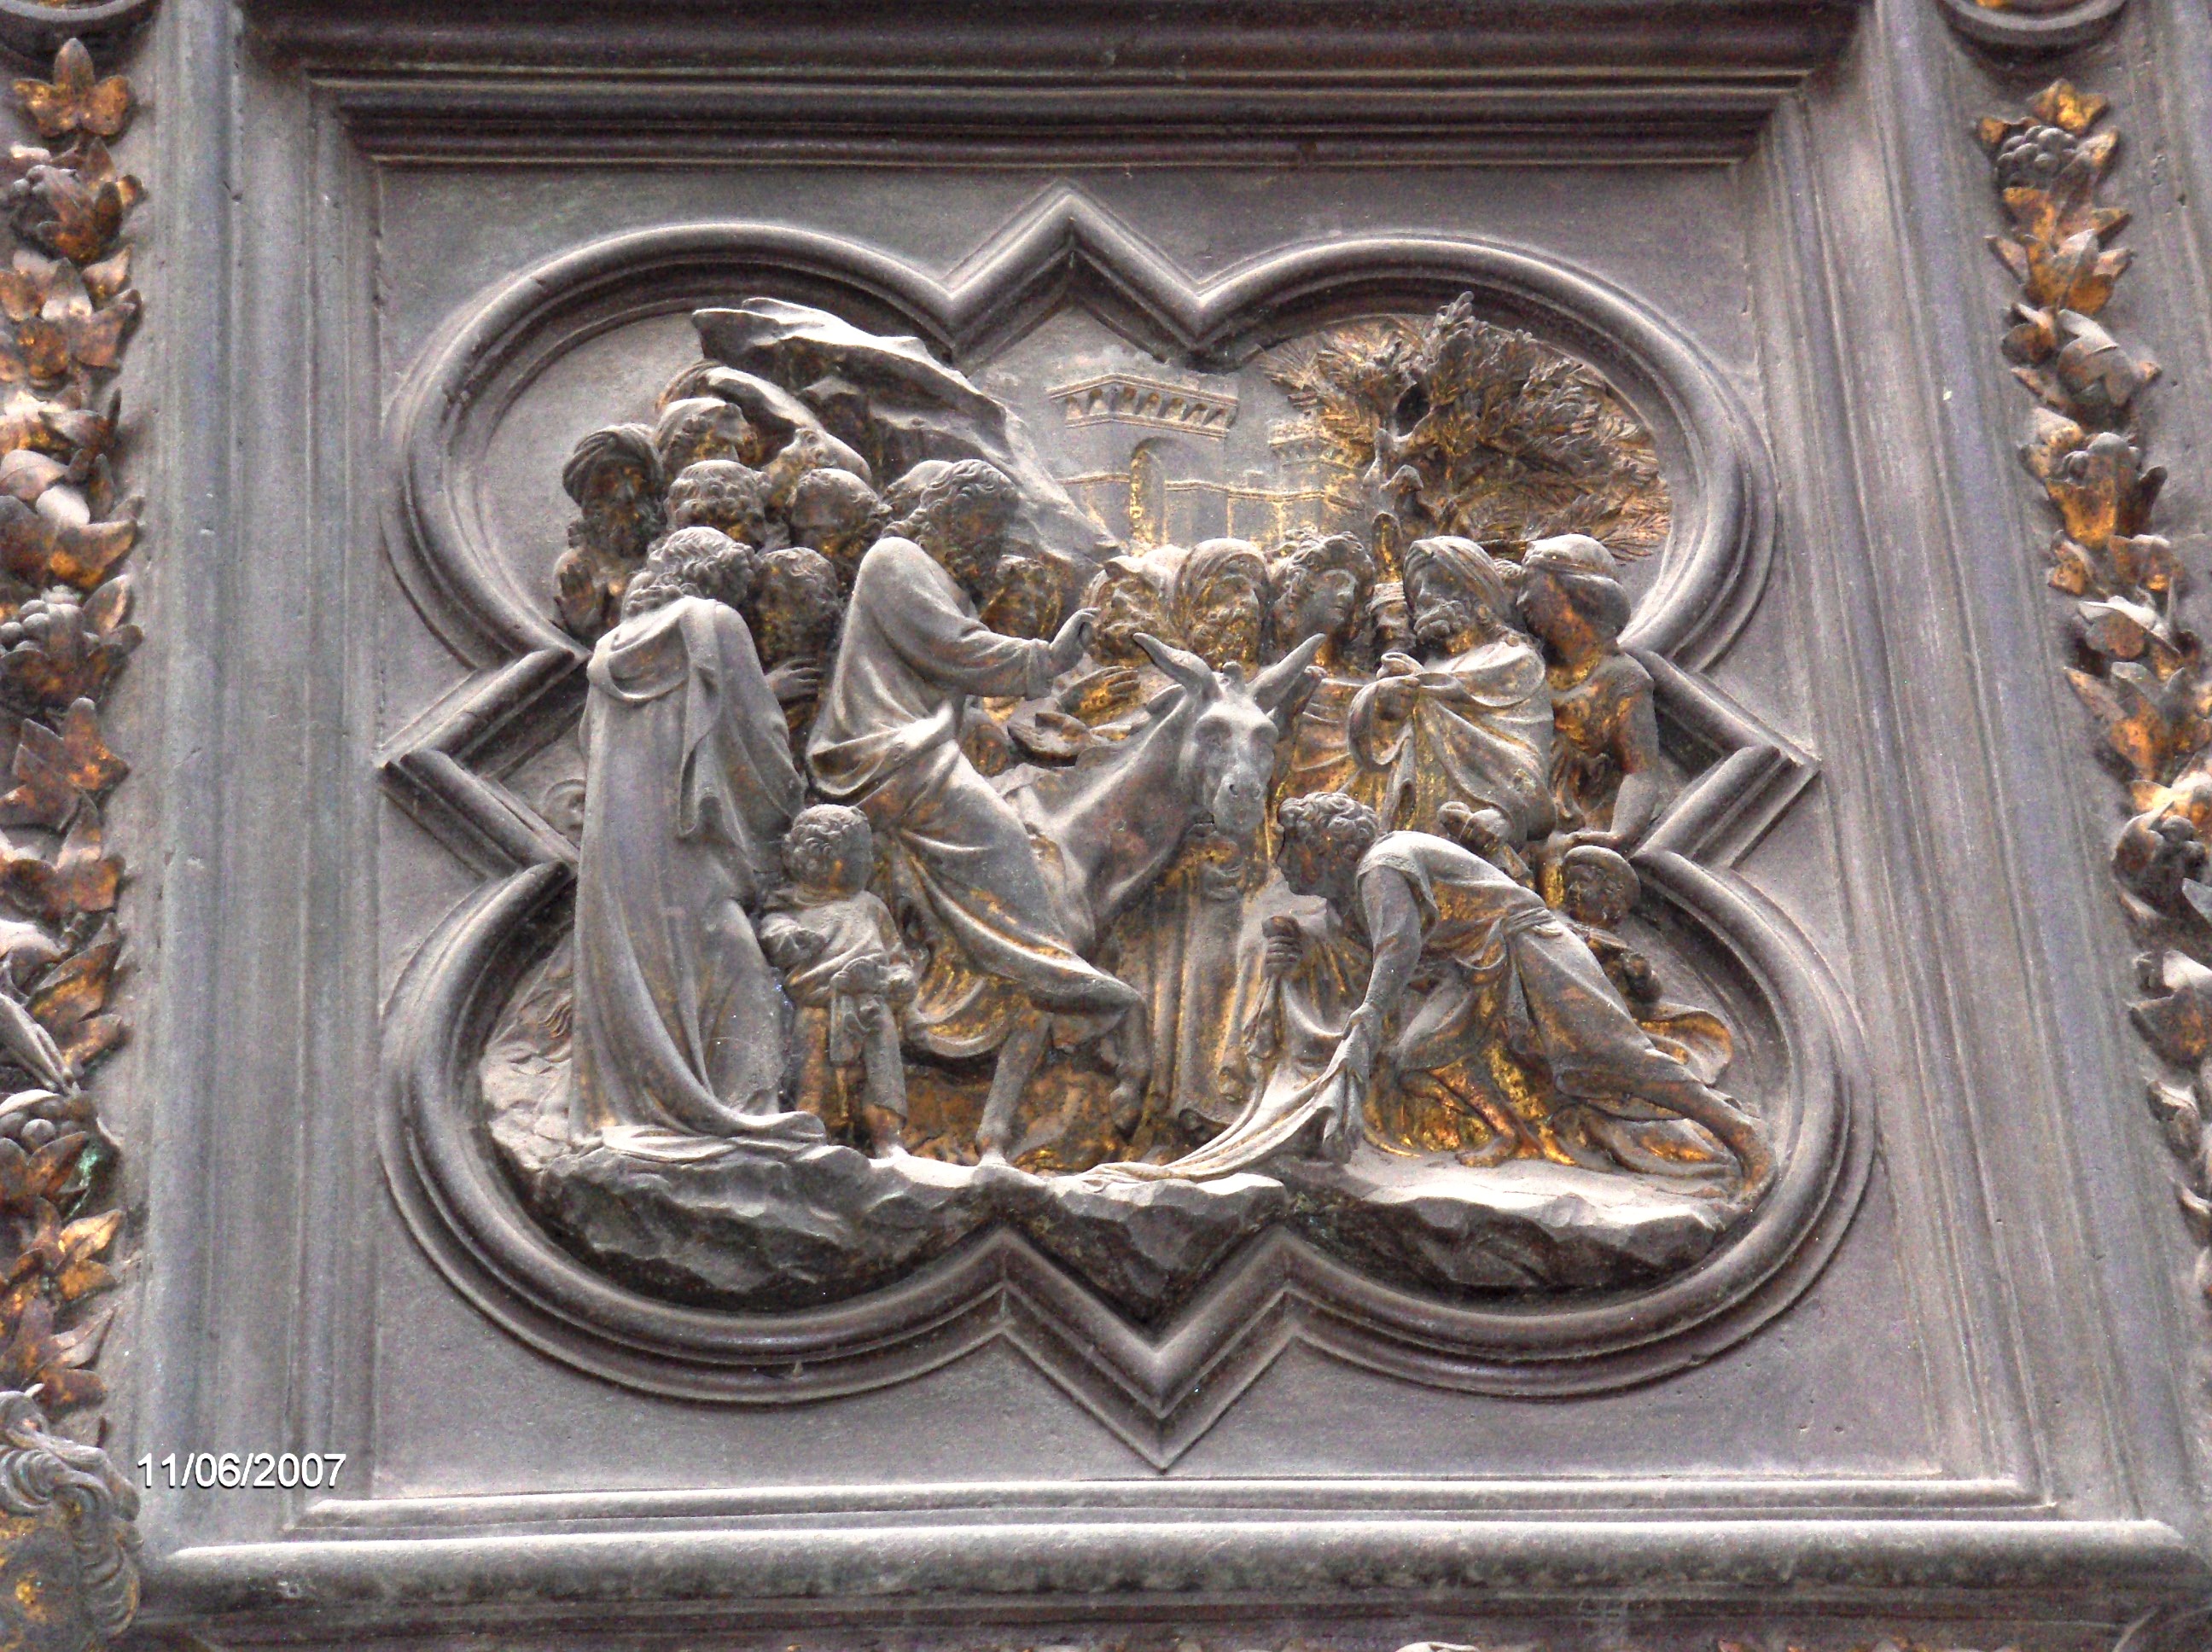 North Baptistery Door depicting Jesus arriving on a donkey